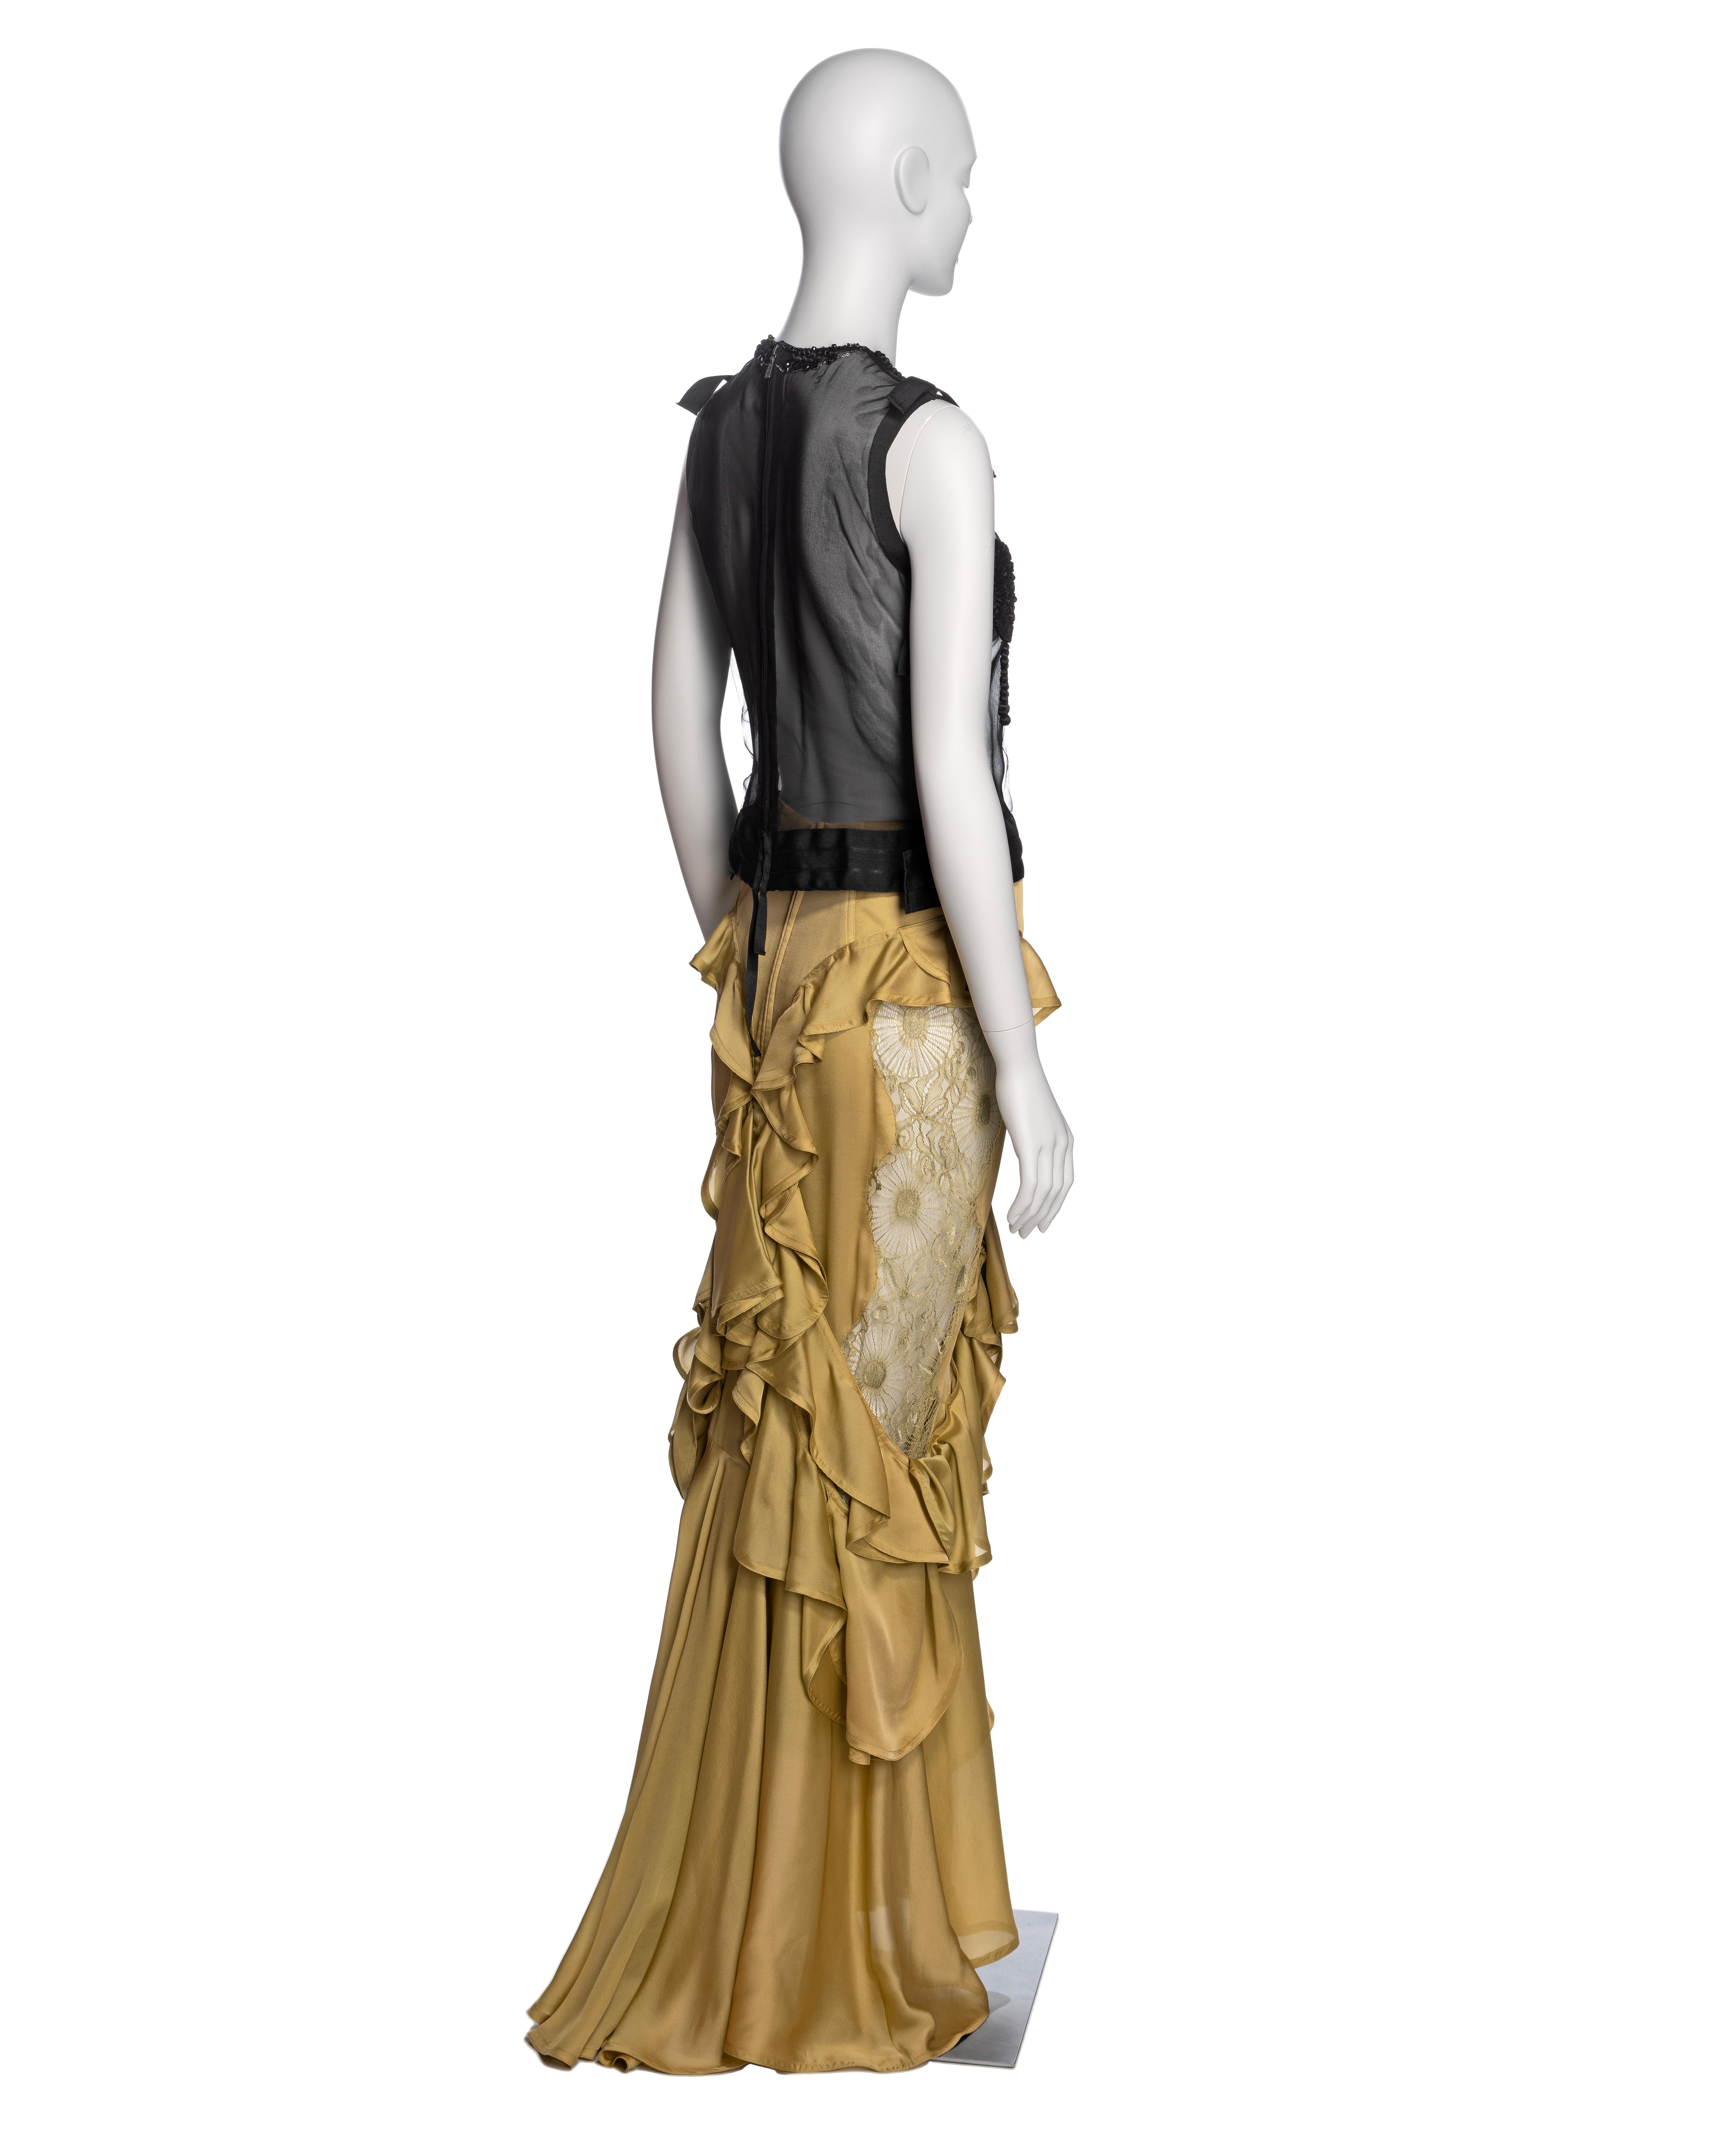 Yves Saint Laurent by Tom Ford Embellished Top and Silk Skirt Ensemble, FW 2003 6